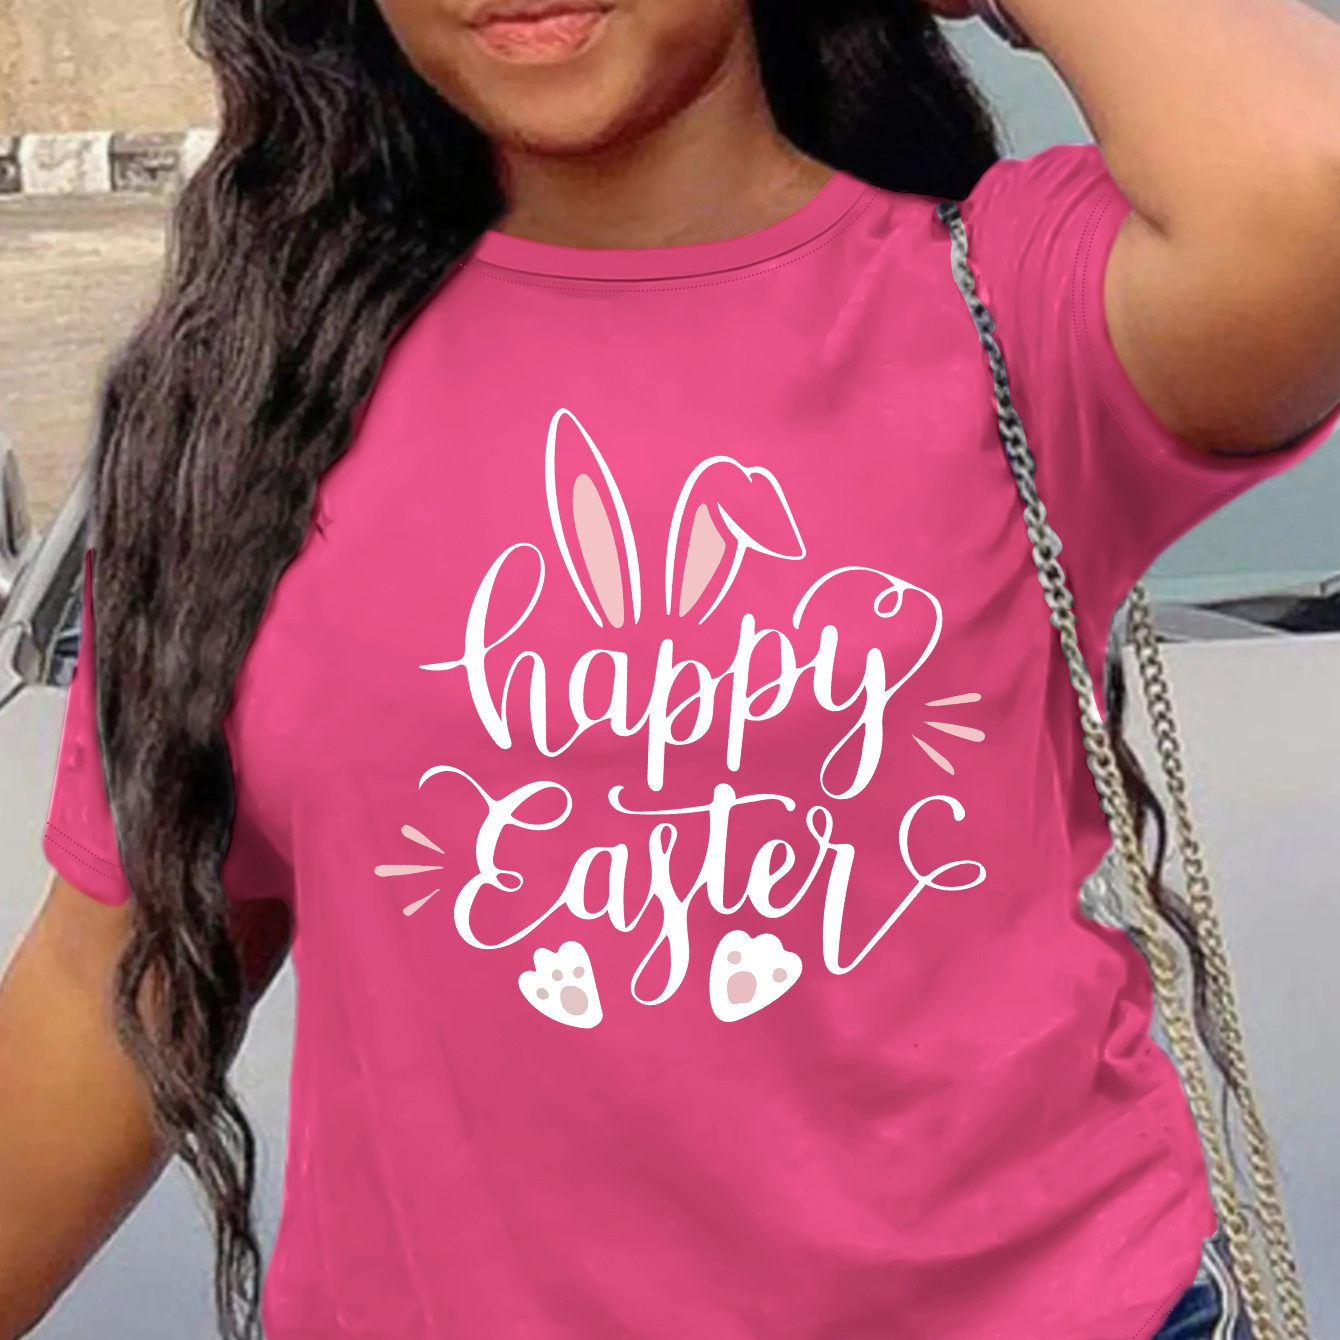 

Plus Size Bunny Ears & Letter Print T-shirt, Casual Short Sleeve Top For Spring & Summer, Women's Plus Size Clothing